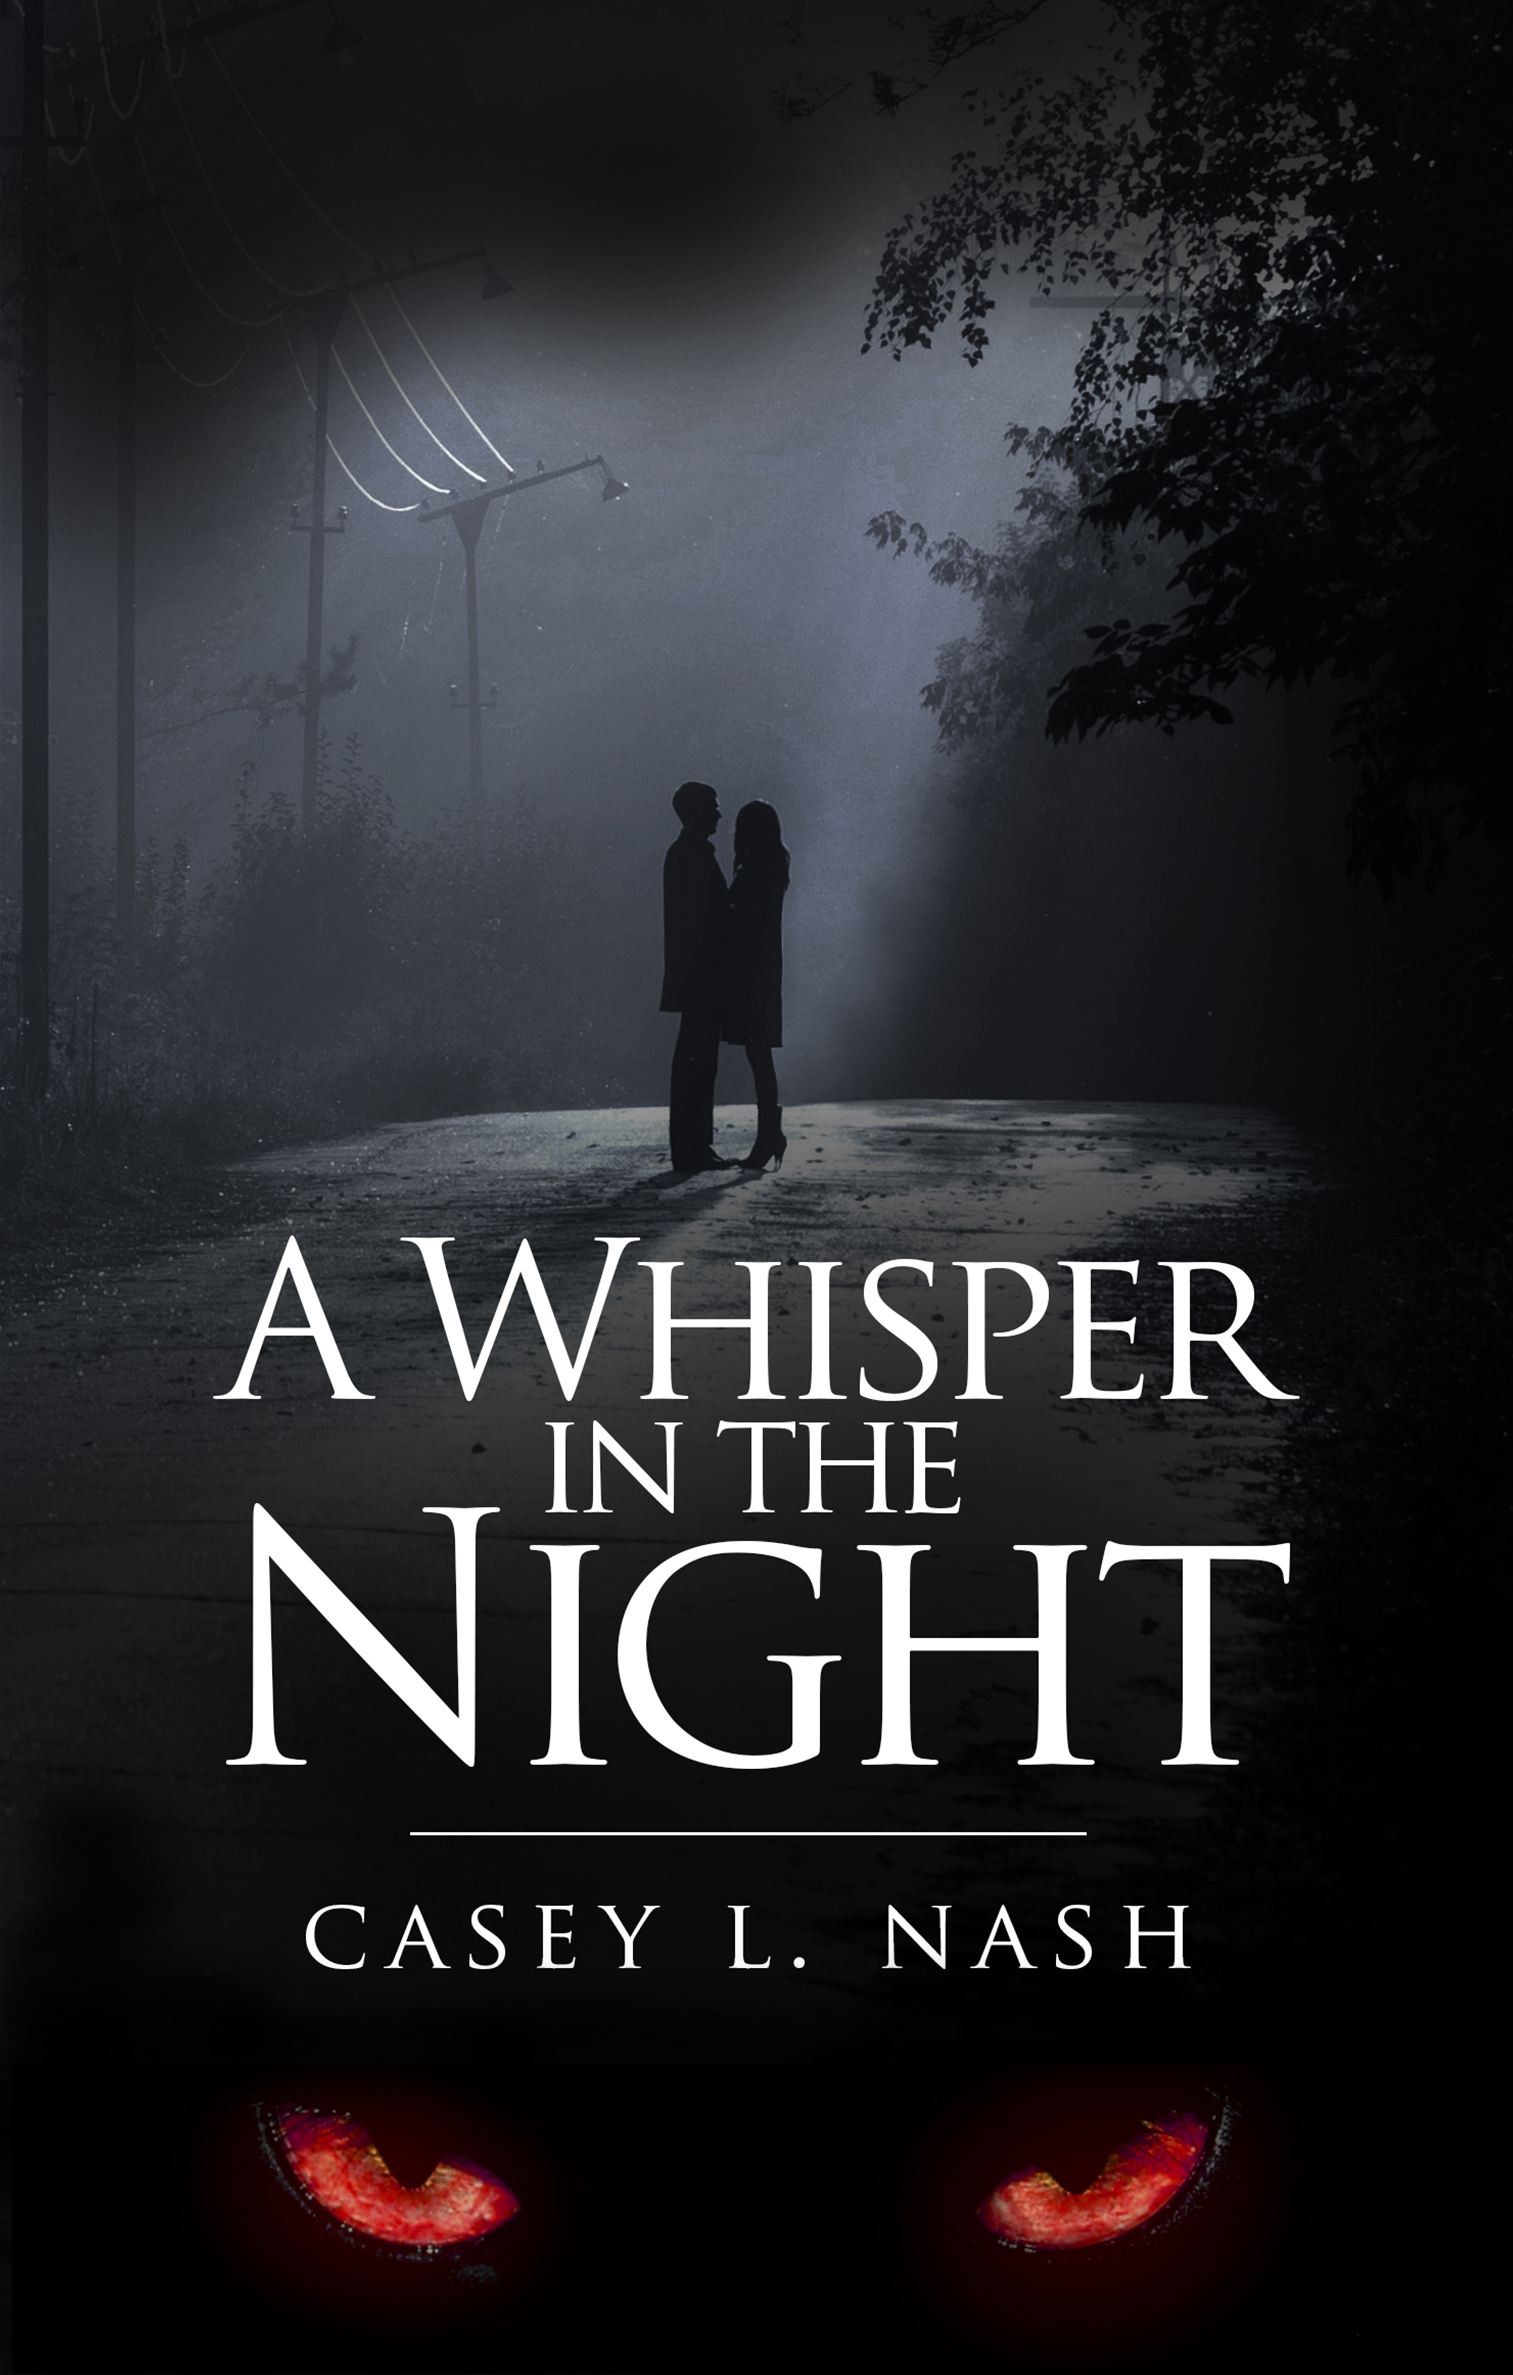 A Whisper in the Night